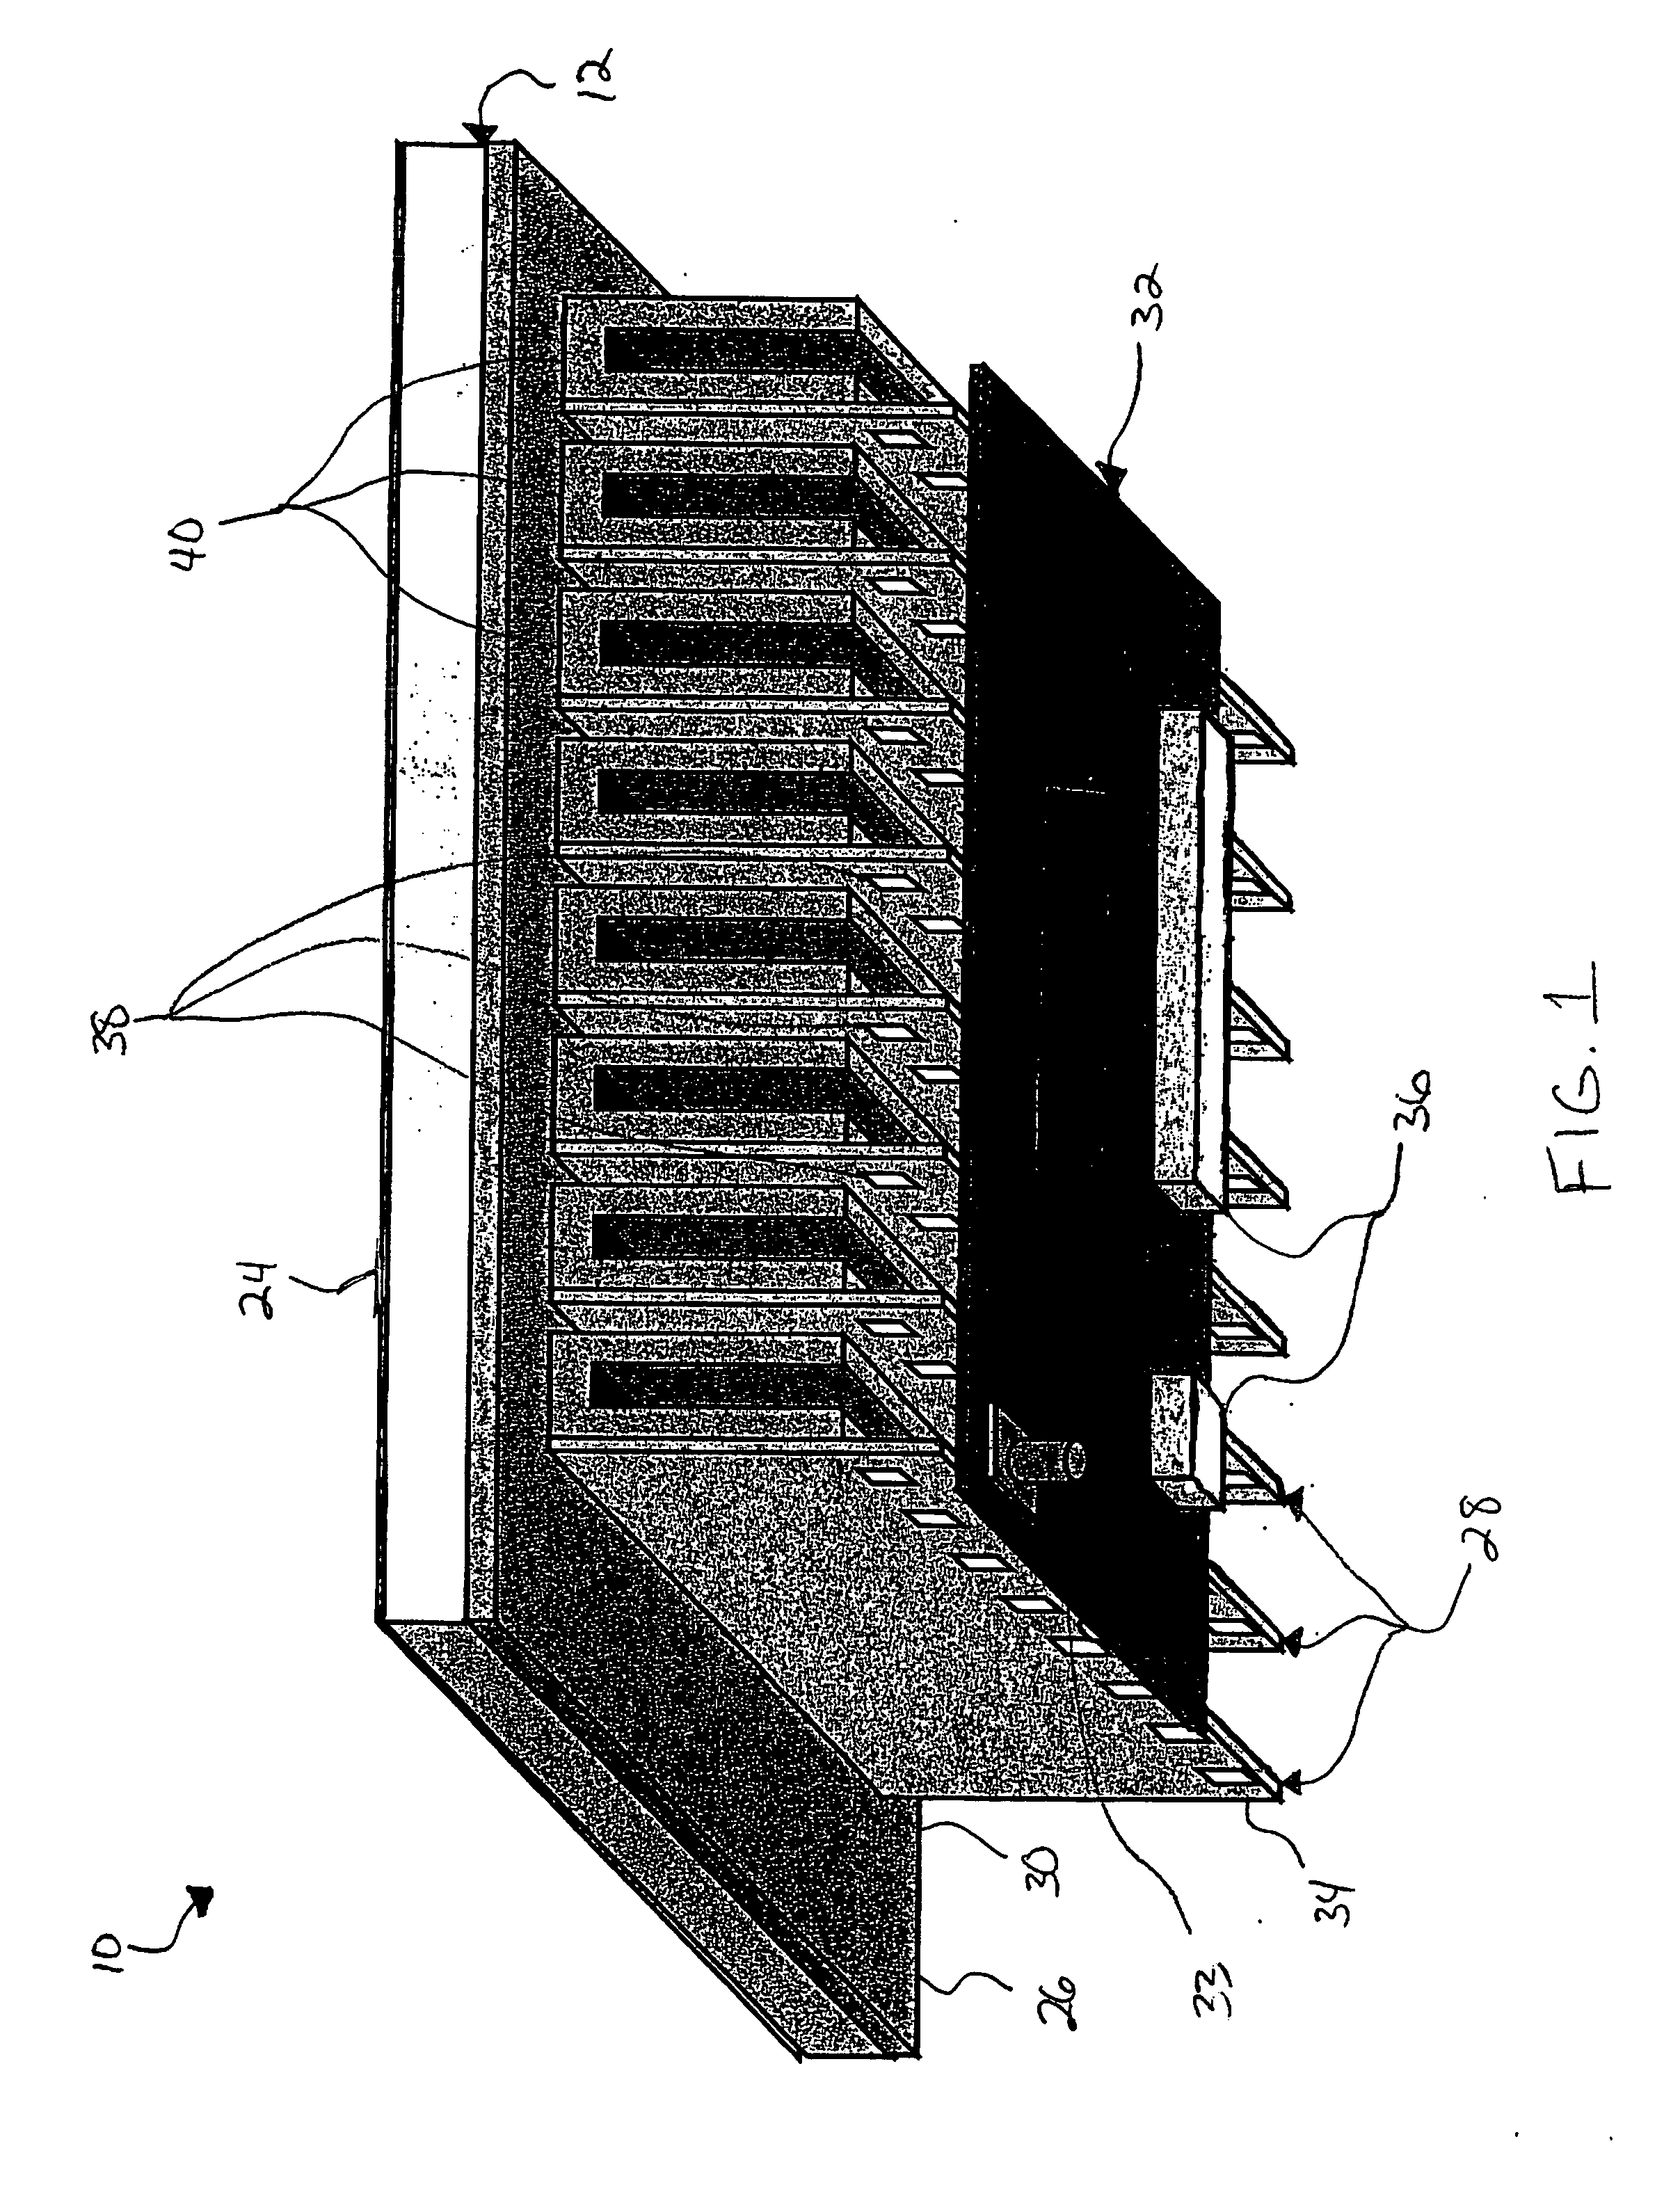 Phased array antenna including transverse circuit boards and associated methods